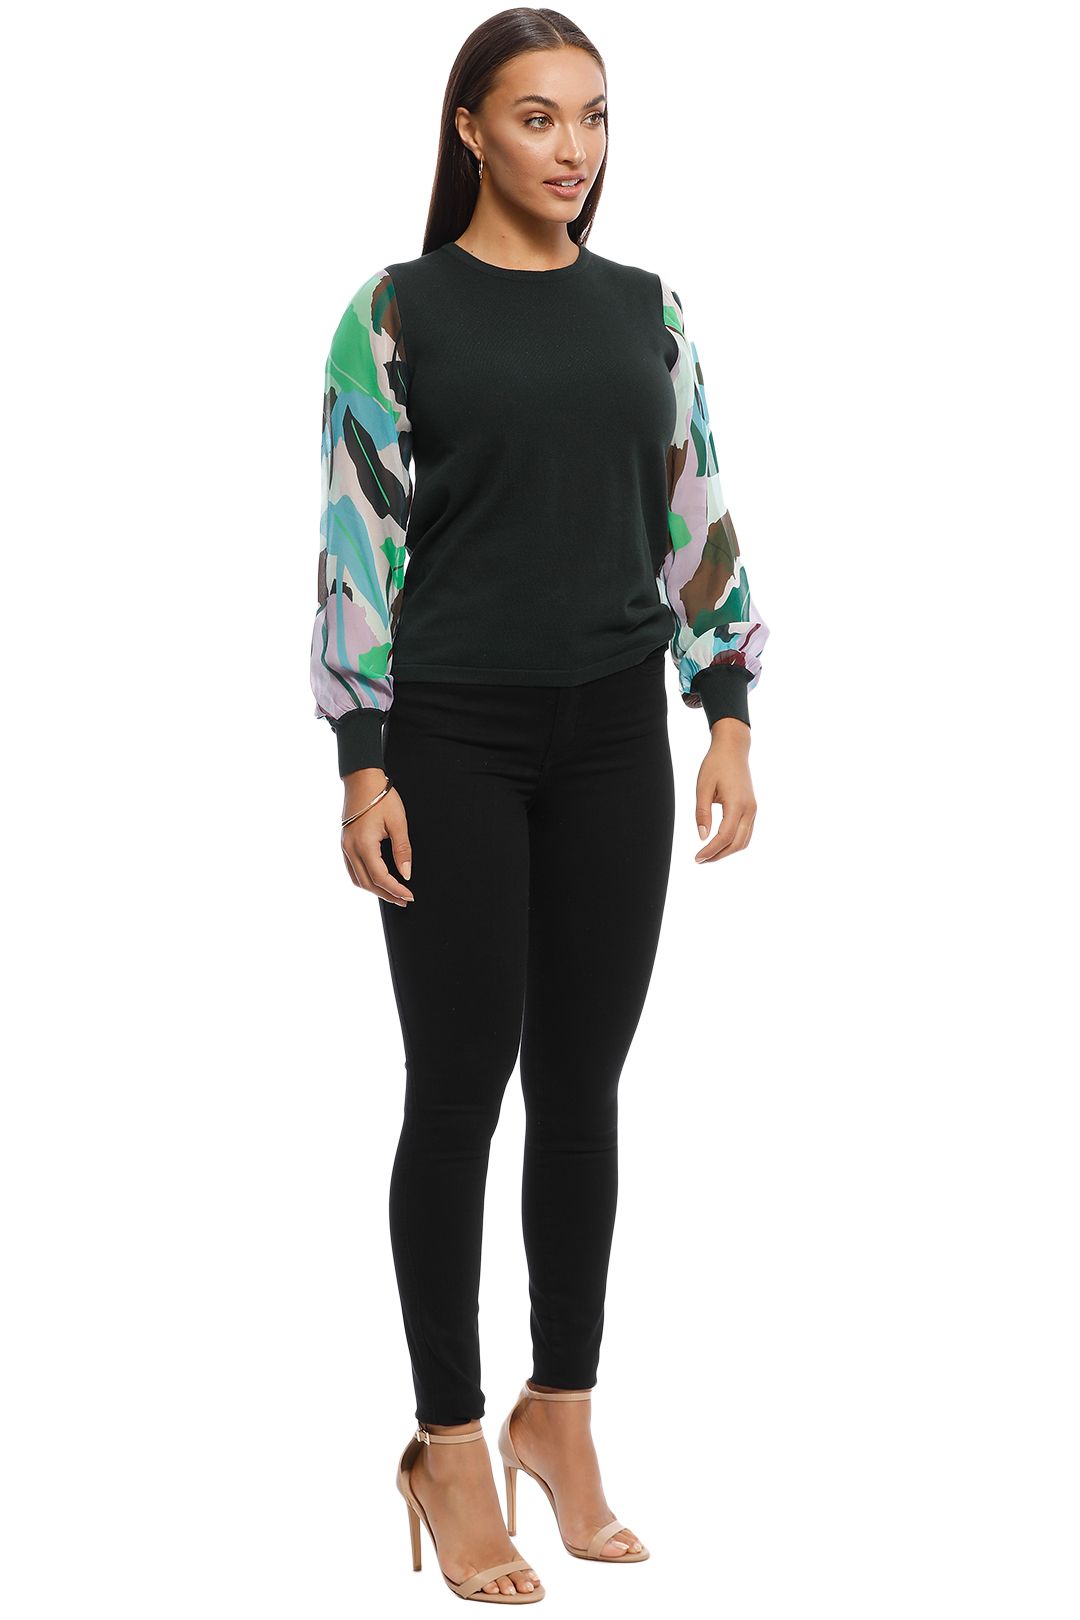 Gorman - Philodendron Knit Top - Black - Side